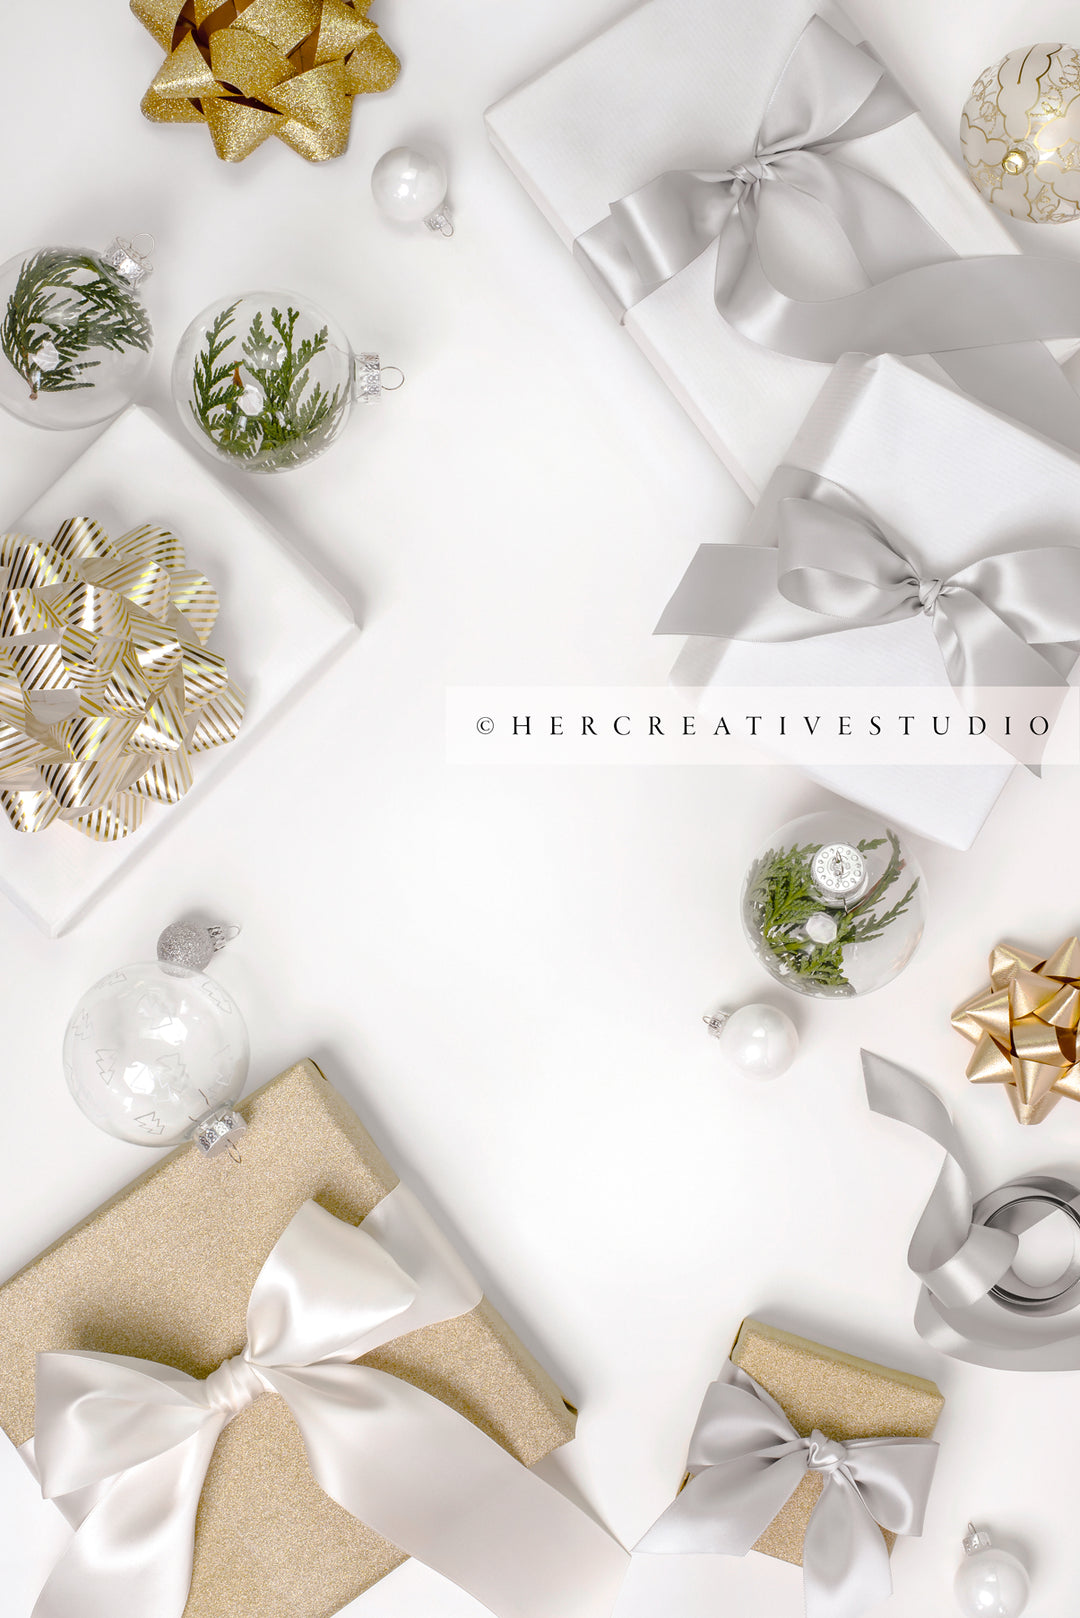 Gold Presents with Ribbon, Ornaments Flatlay on White Background